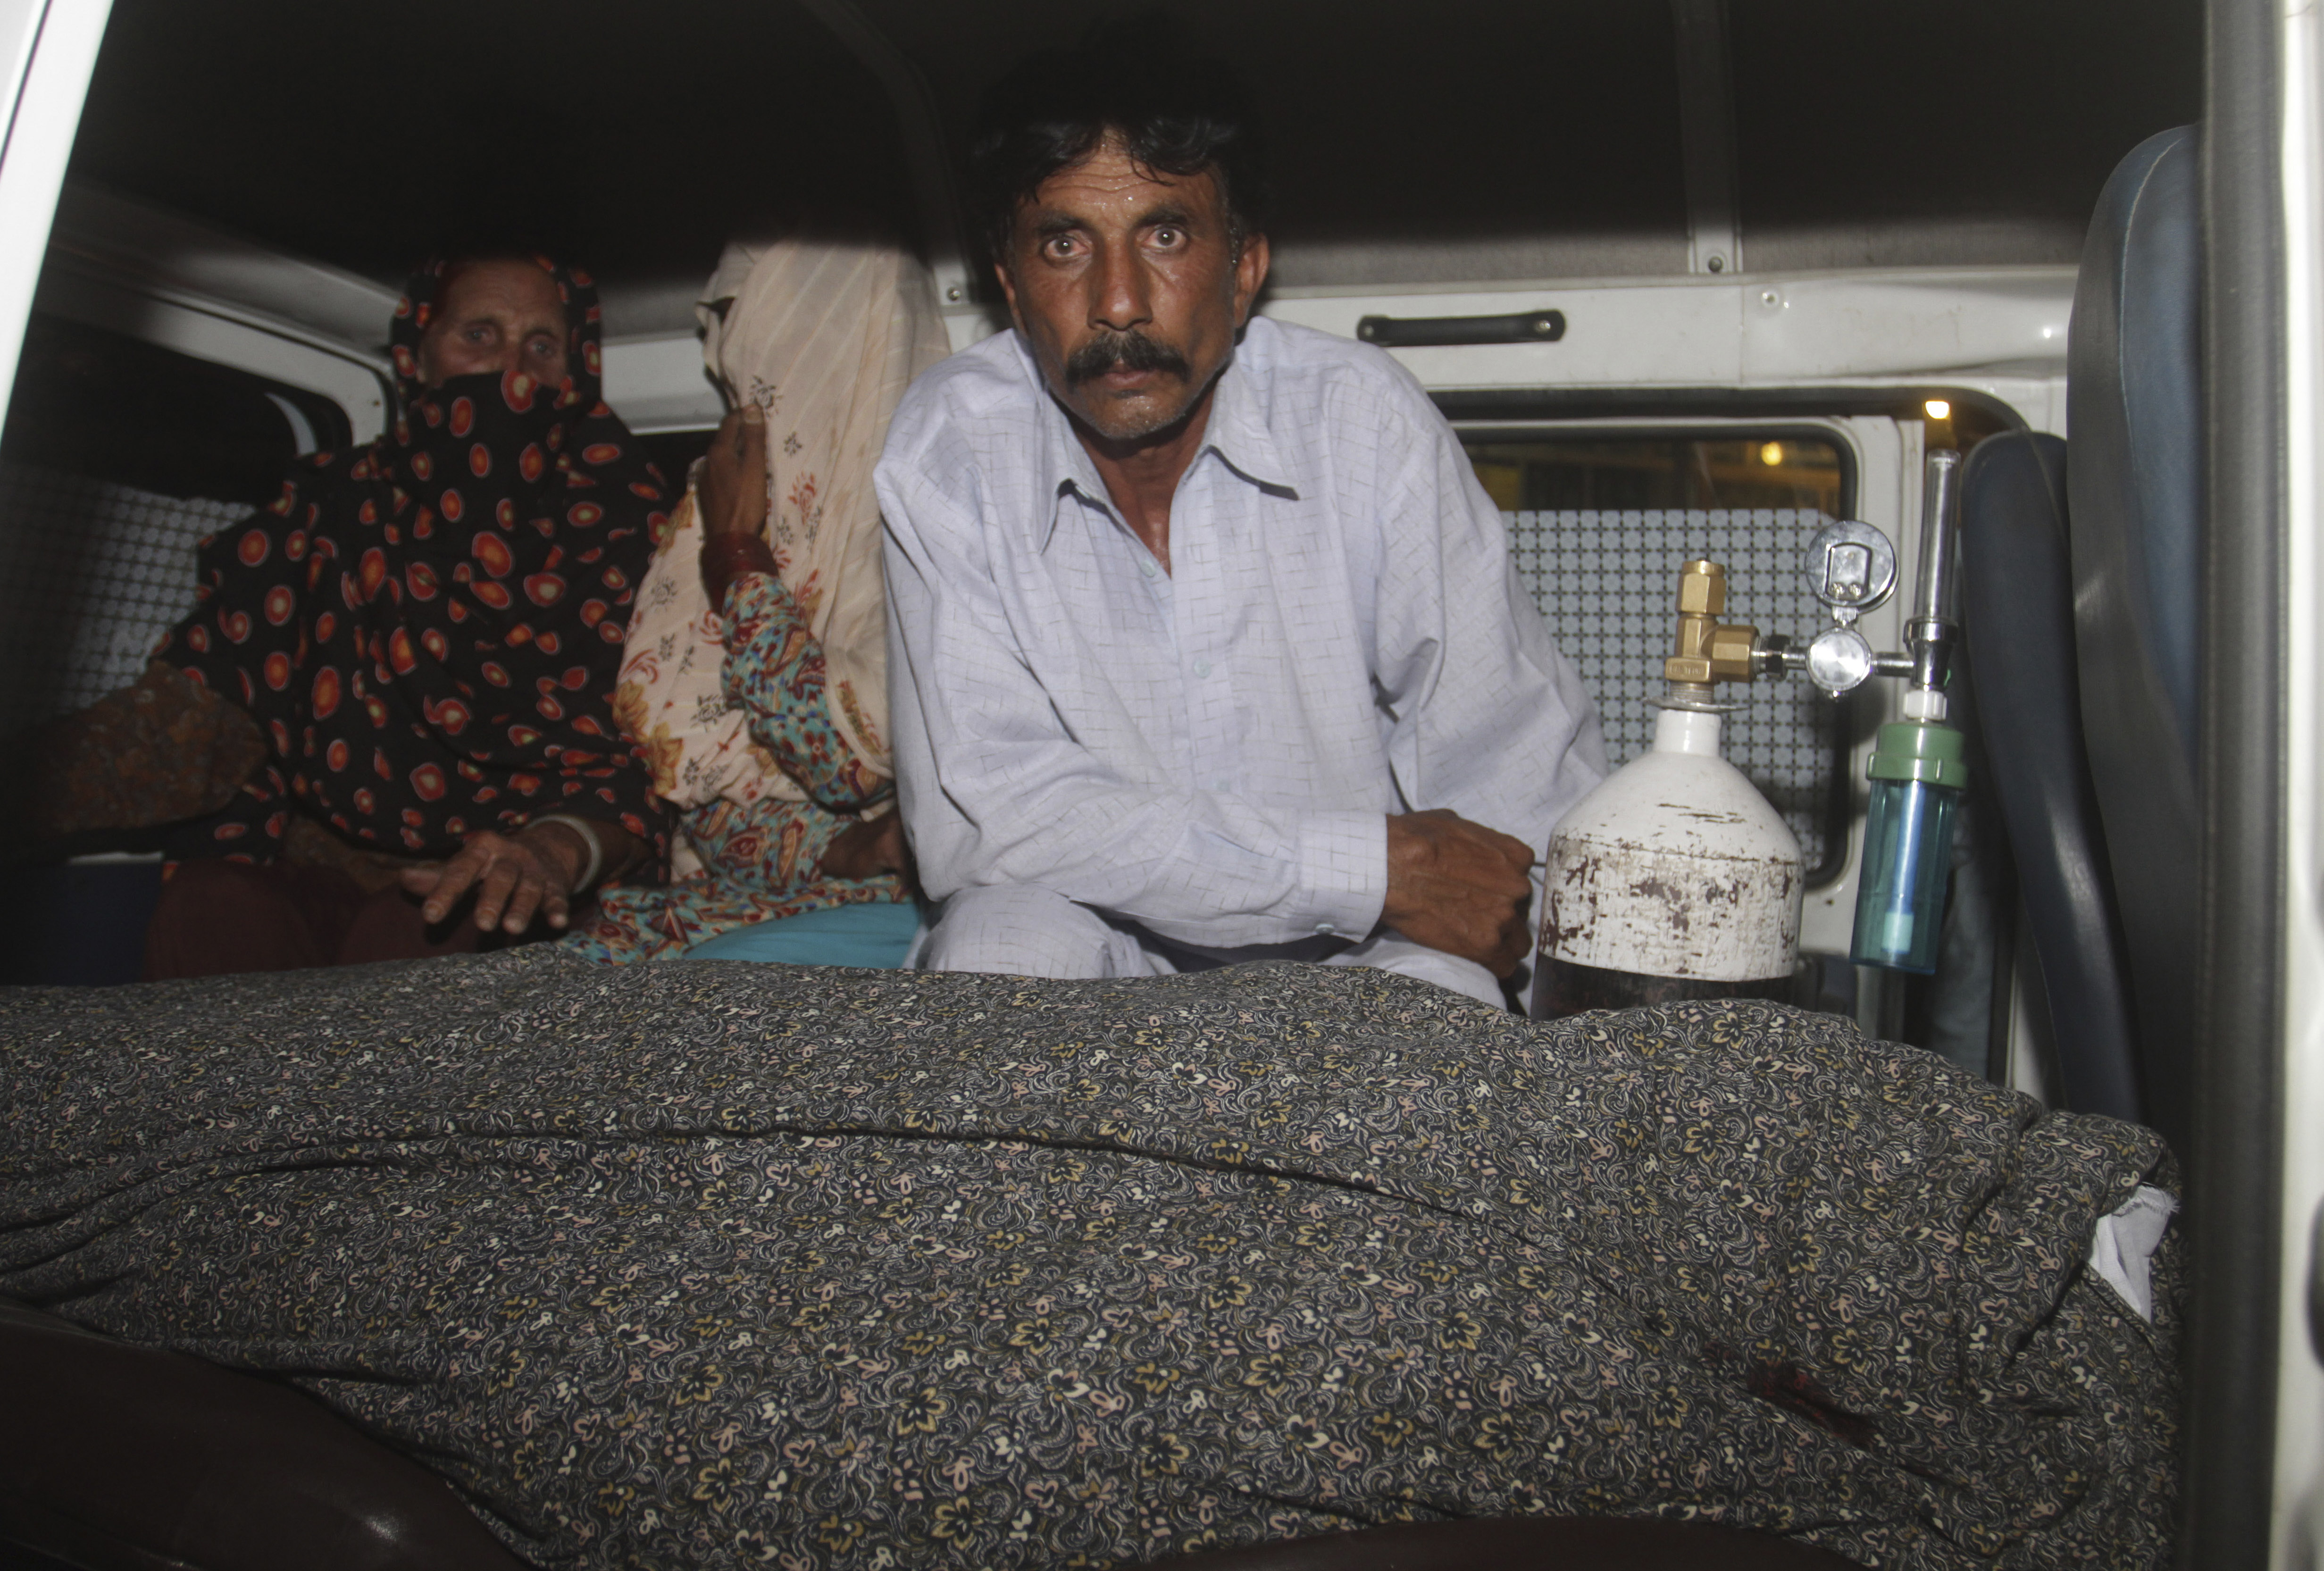 Mohammad Iqbal, right, husband of Farzana Parveen, 25, sits in an ambulance next to the body of his pregnant wife who was stoned to death by her own family, in Lahore, Pakistan, Tuesday, May 27, 2014. Nearly 20 members of the woman's family, including her father and brothers, attacked her and her husband with batons and bricks in broad daylight before a crowd of onlookers in front of the high court of Lahore, police investigator Rana Mujahid said. (AP Photo/K.M. Chaudary)